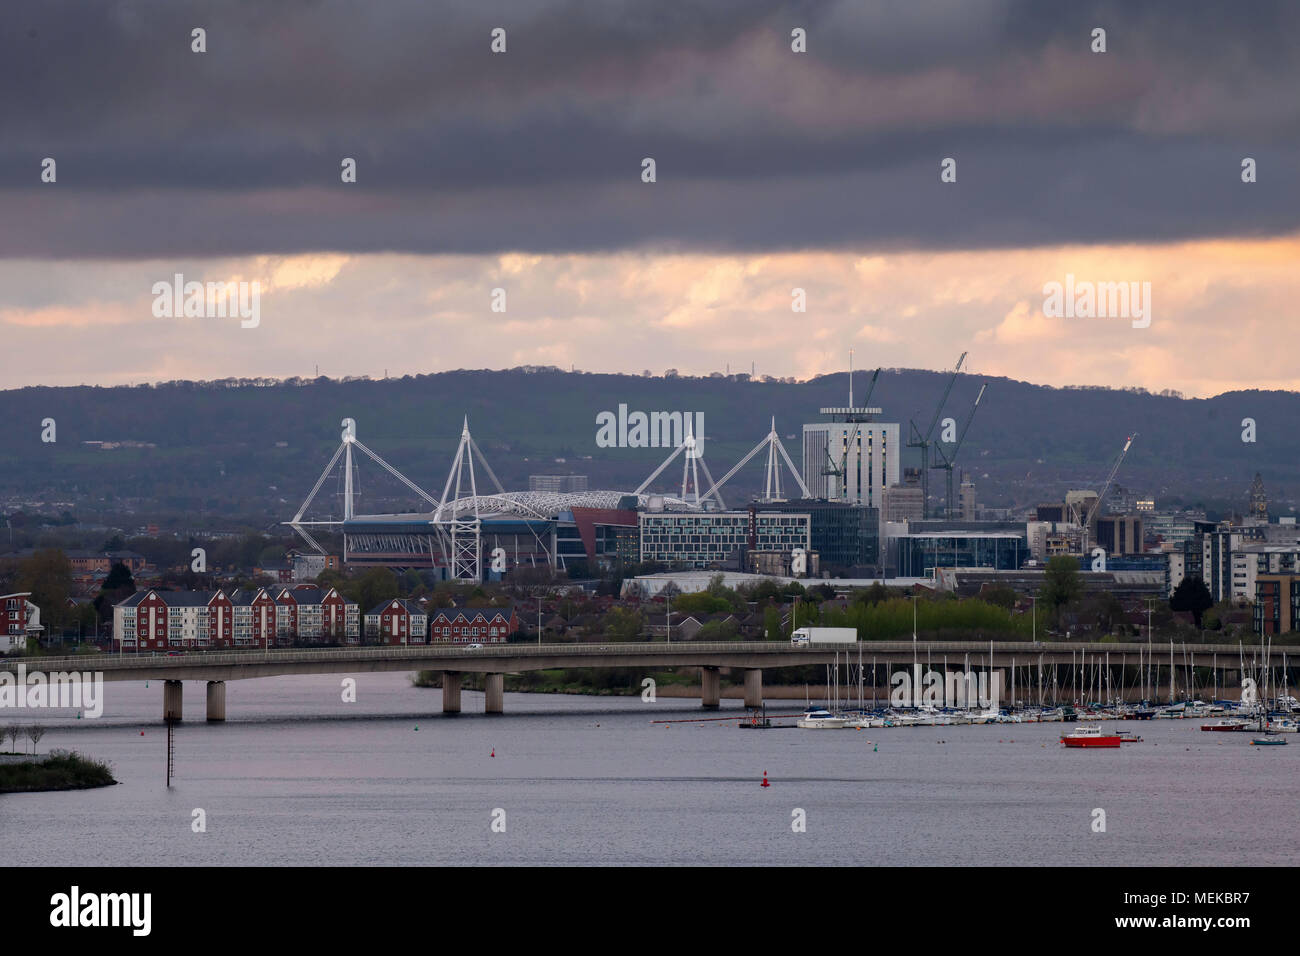 A general view of Cardiff City centre with dark, moody skies showing the Principality Stadium, formerly the Millennium Stadium and River Taff. Stock Photo